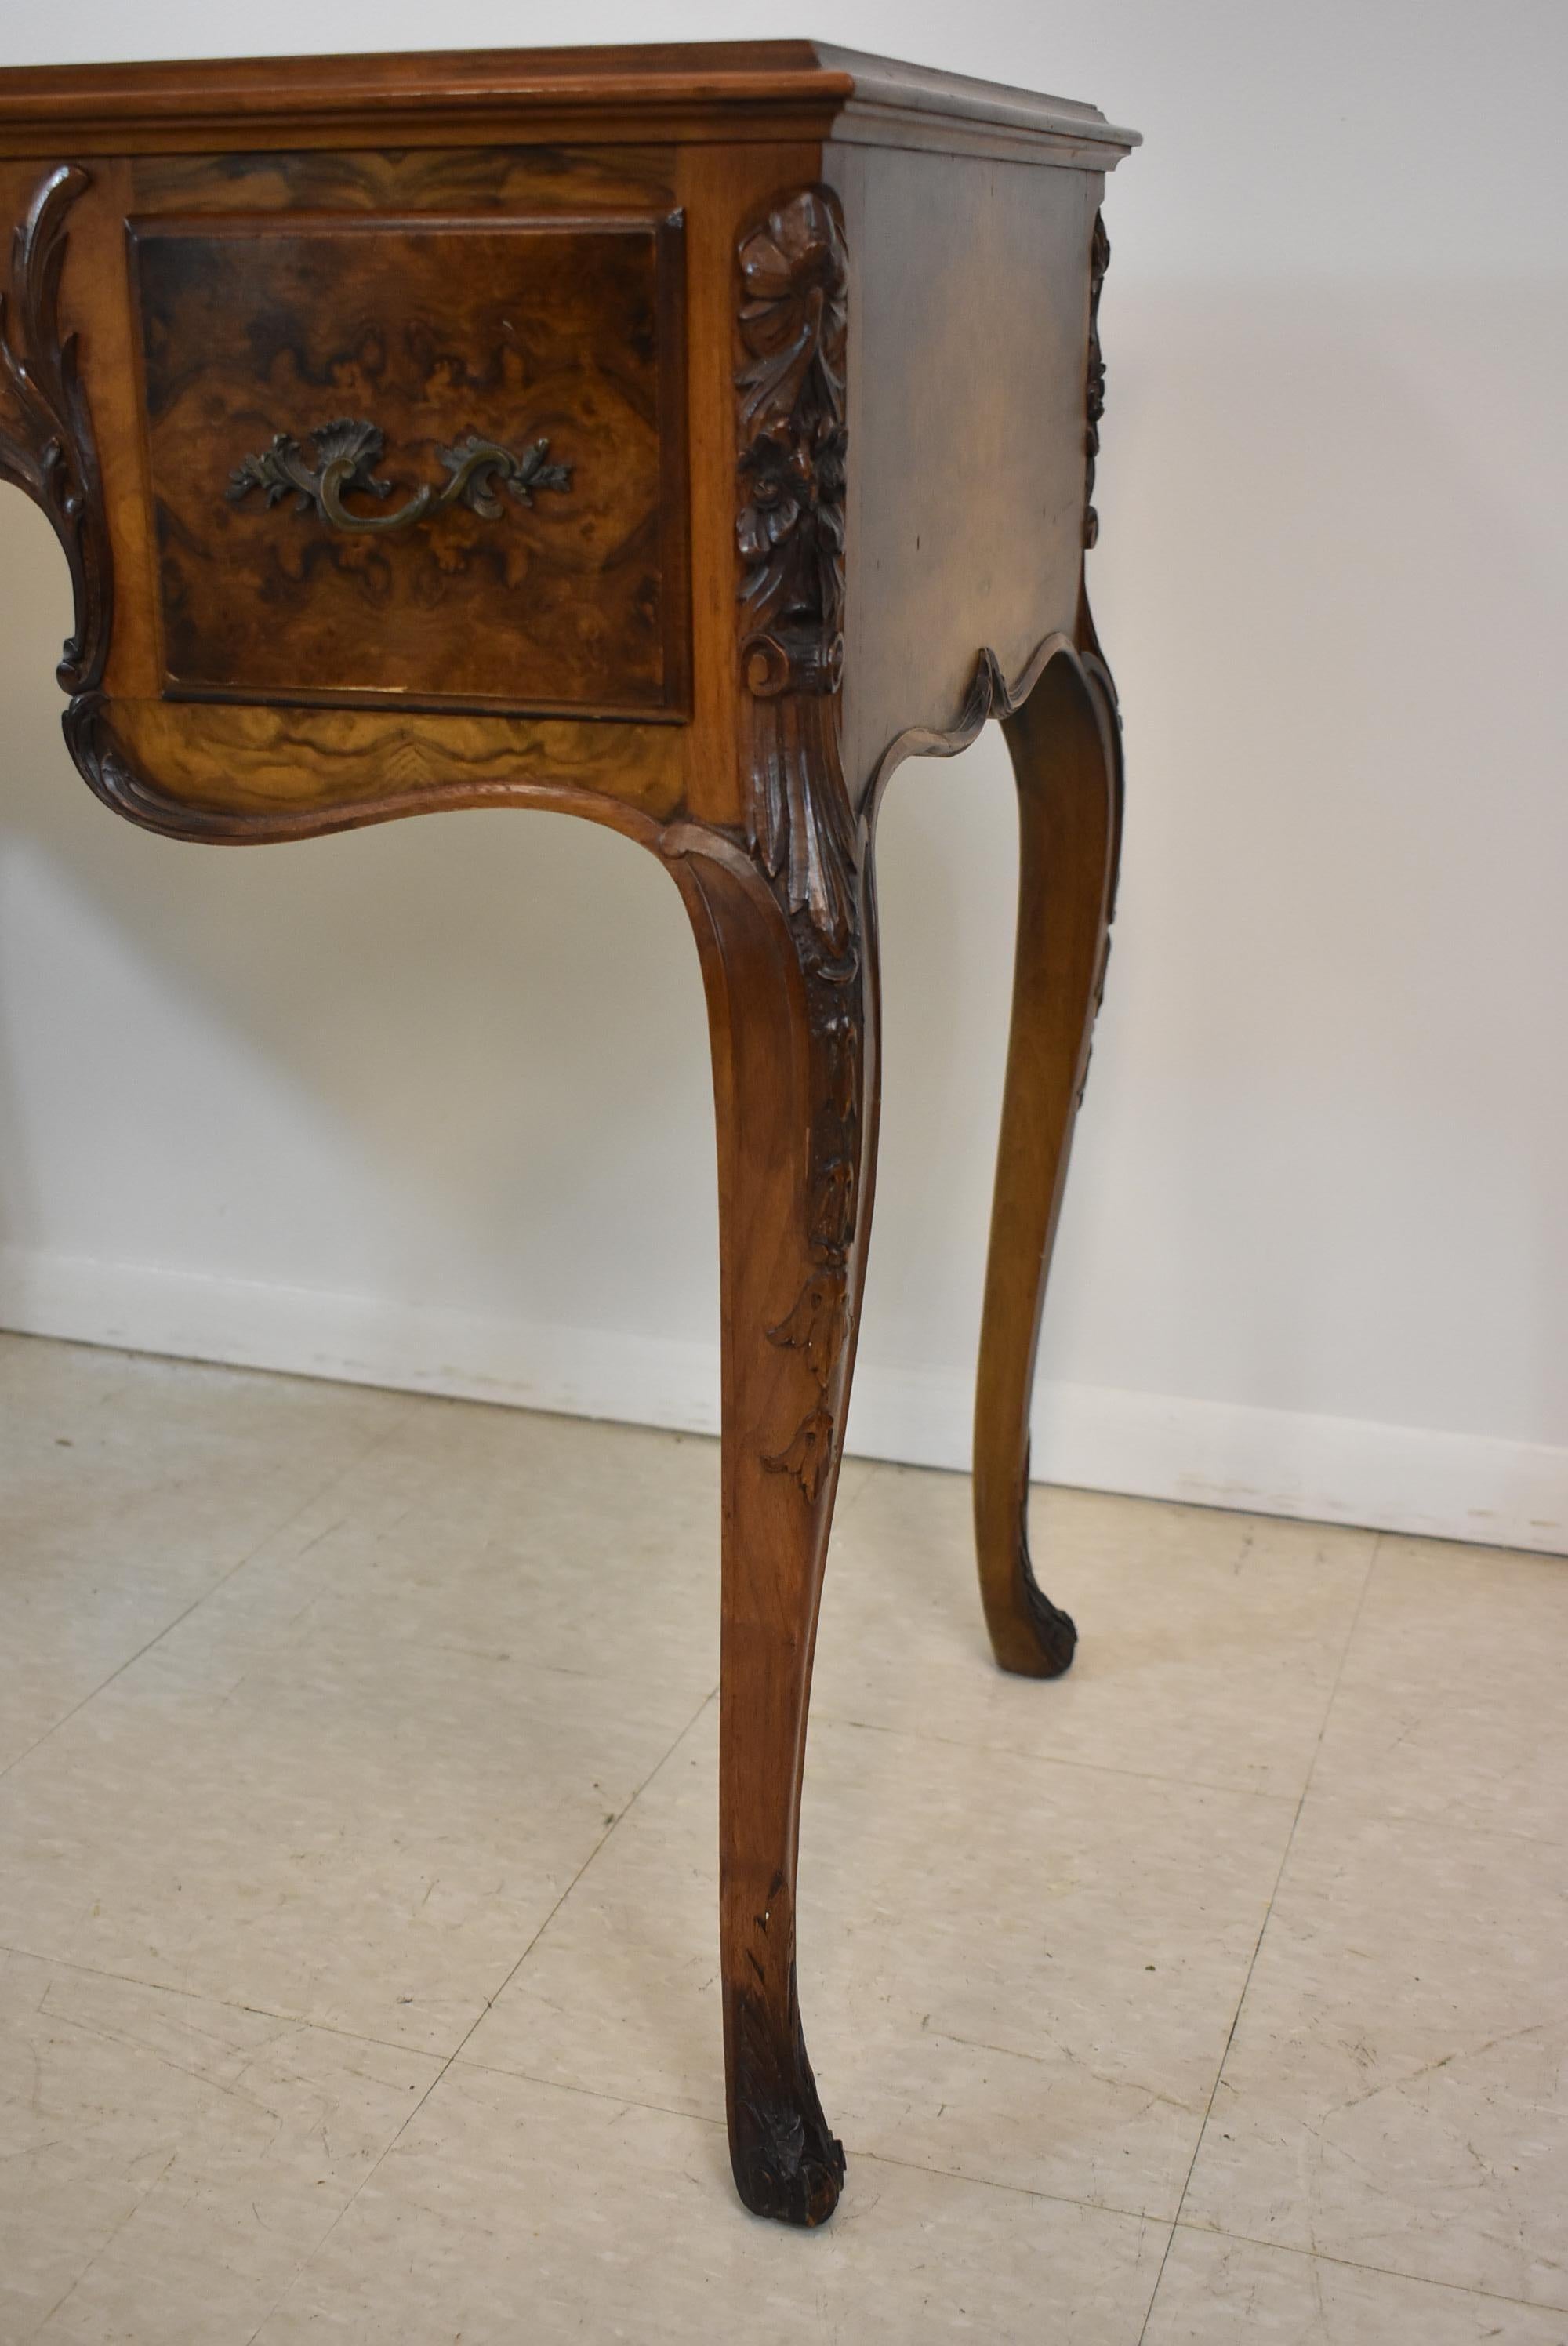 North American Louis XV French Style Walnut Dressing Table / Vanity & Chair by Irwin Furniture